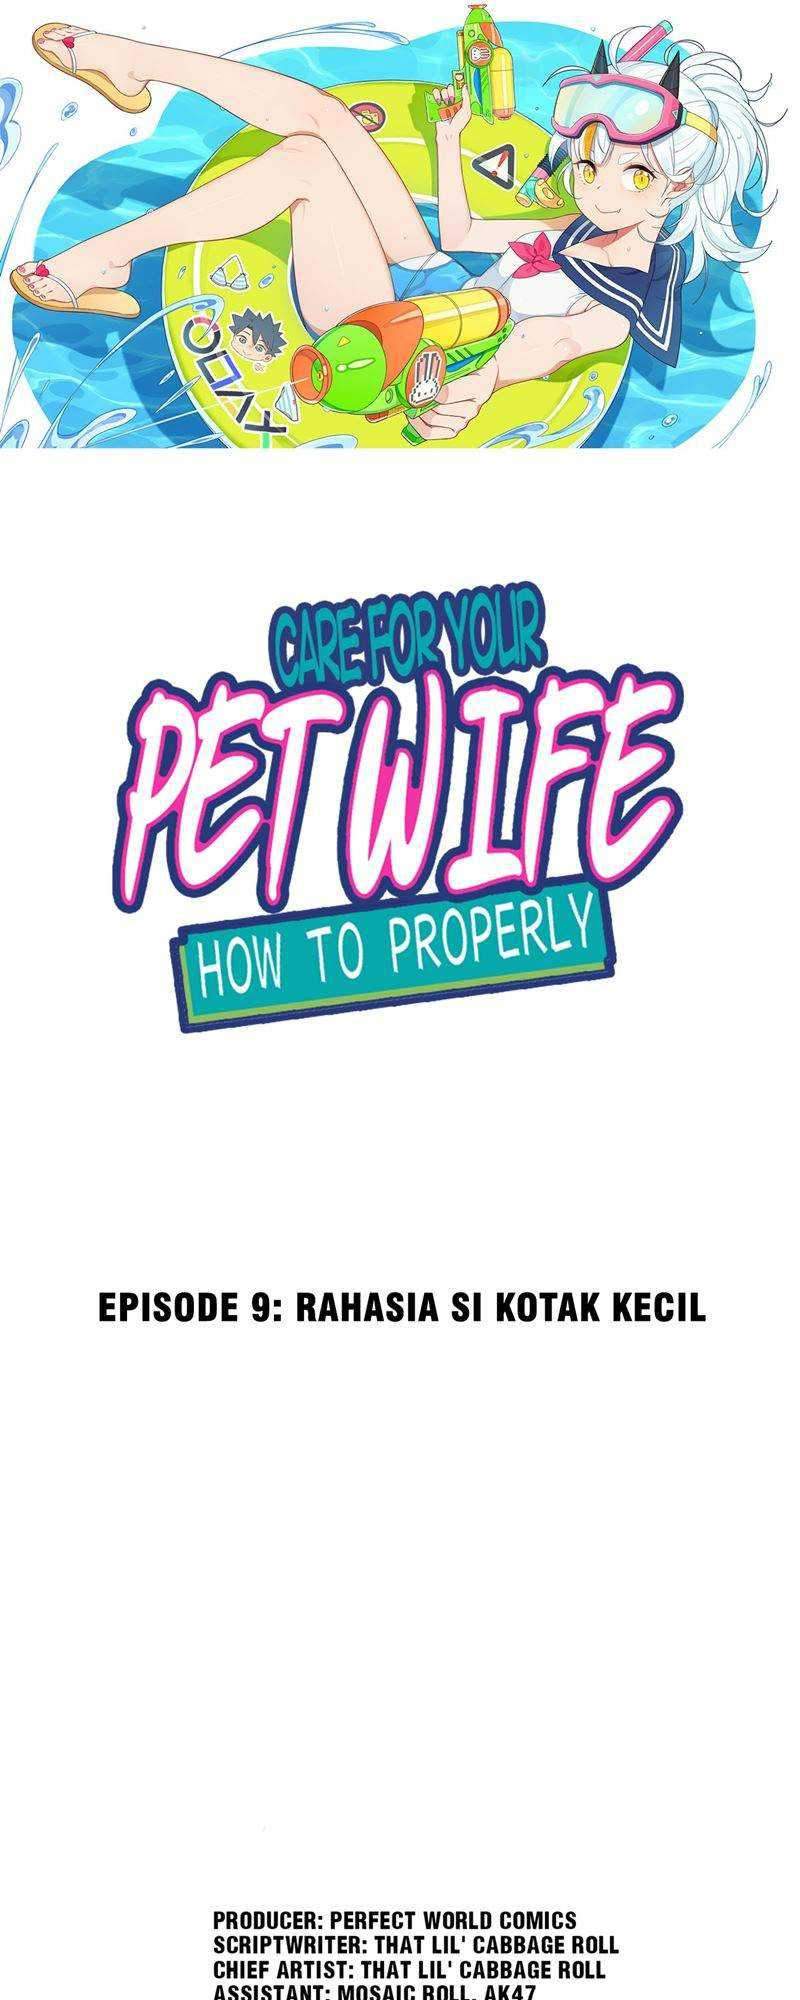 How To Properly Care For Your Pet Wife Chapter 9